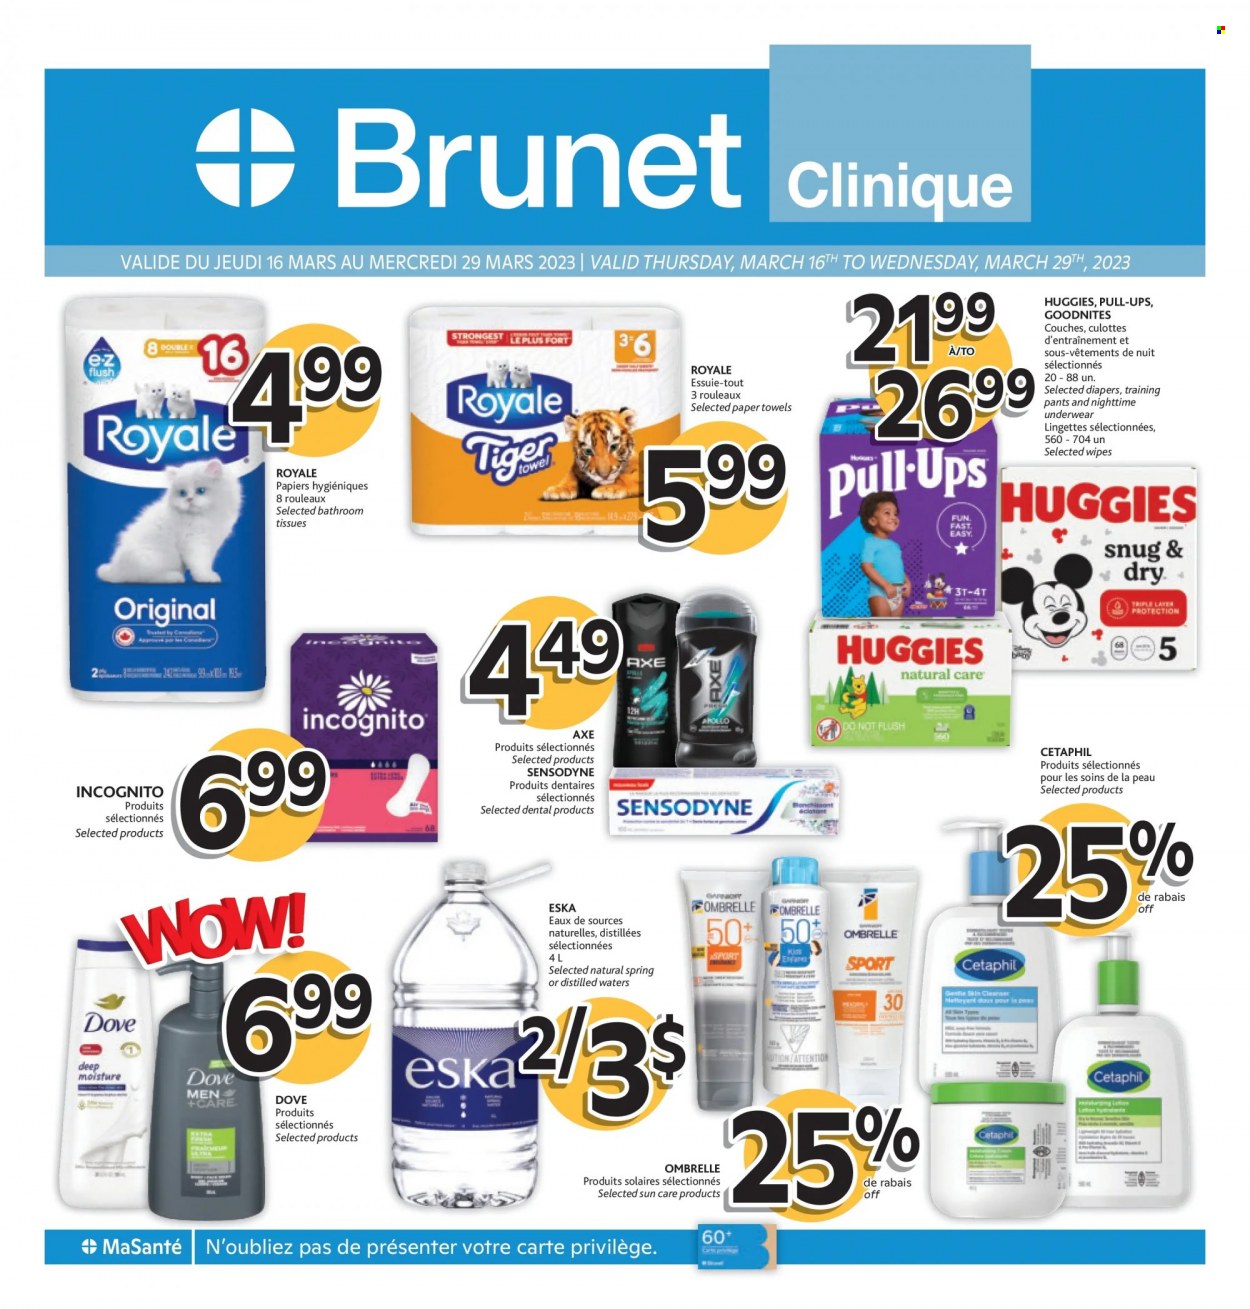 thumbnail - Brunet Clinique Flyer - March 16, 2023 - March 29, 2023 - Sales products - wipes, pants, nappies, baby pants, Dove, toilet paper, tissues, kitchen towels, paper towels, cleanser, Clinique, Axe, Huggies, Sensodyne. Page 1.